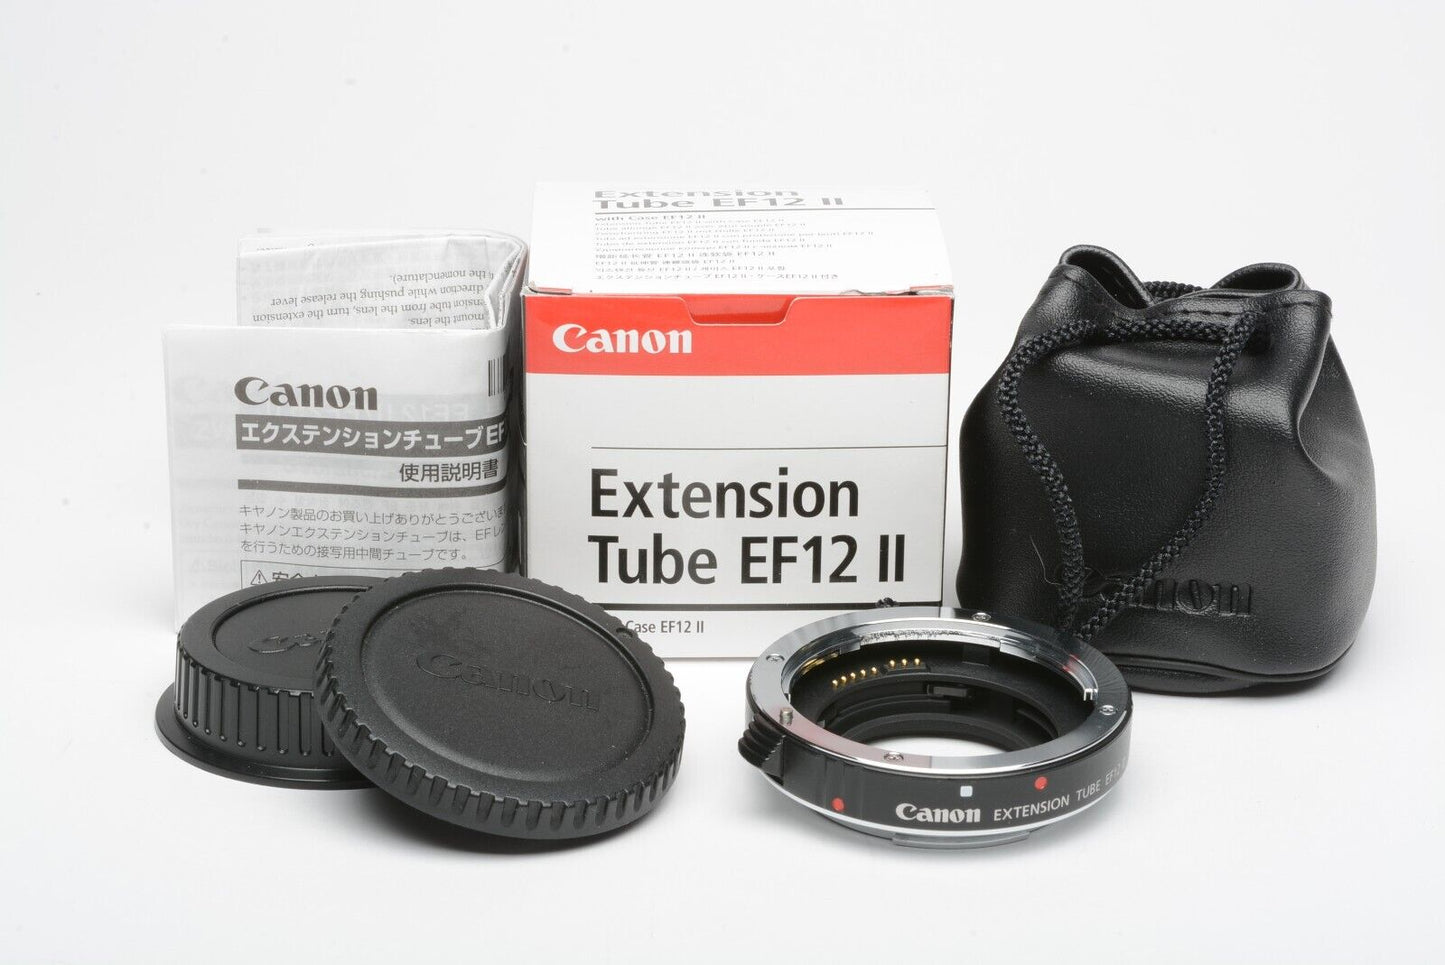 MINT- BOXED CANON EF12 II EXTENSION TUBE w/CAPS, POUCH, BARELY USED